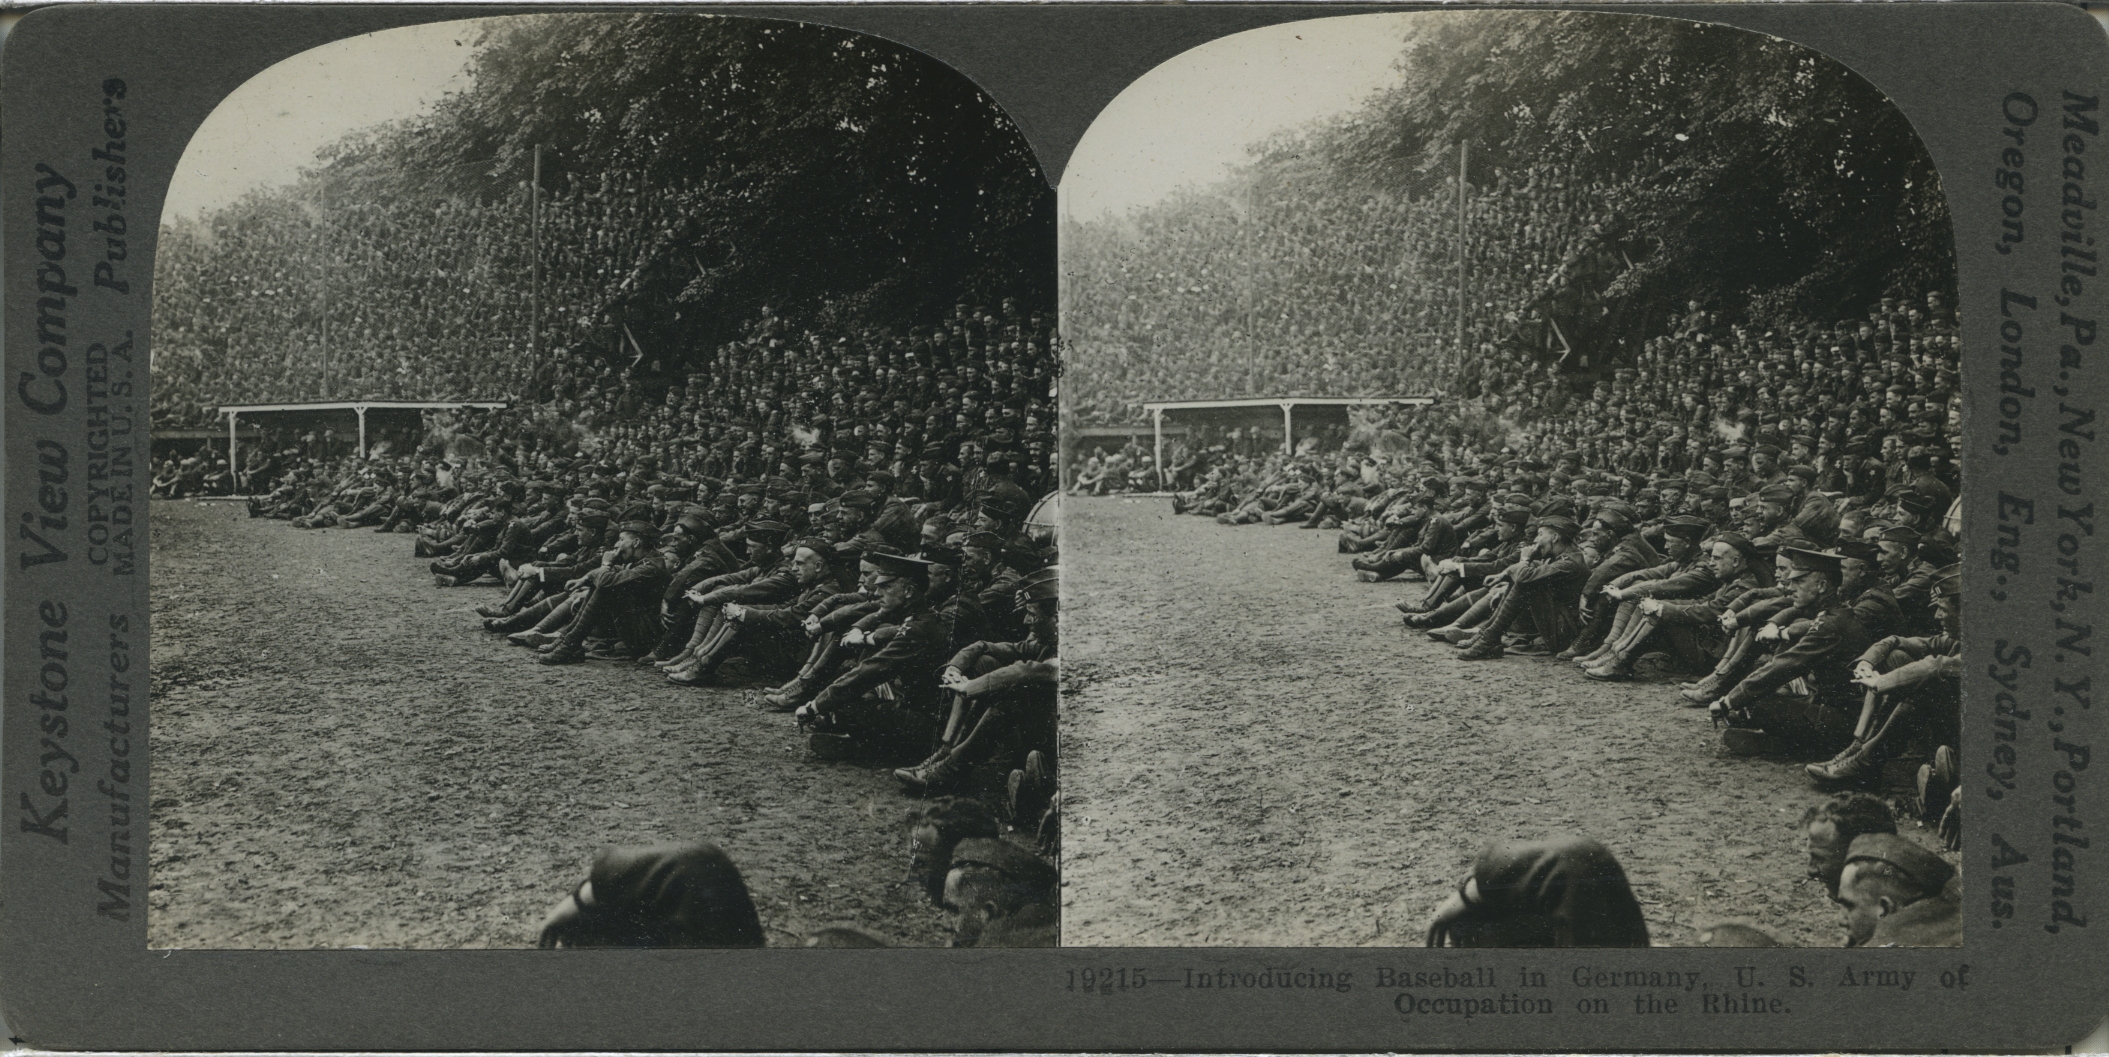 Introducing Baseball in Germany, U.S. Army of Occupation on the Rhine